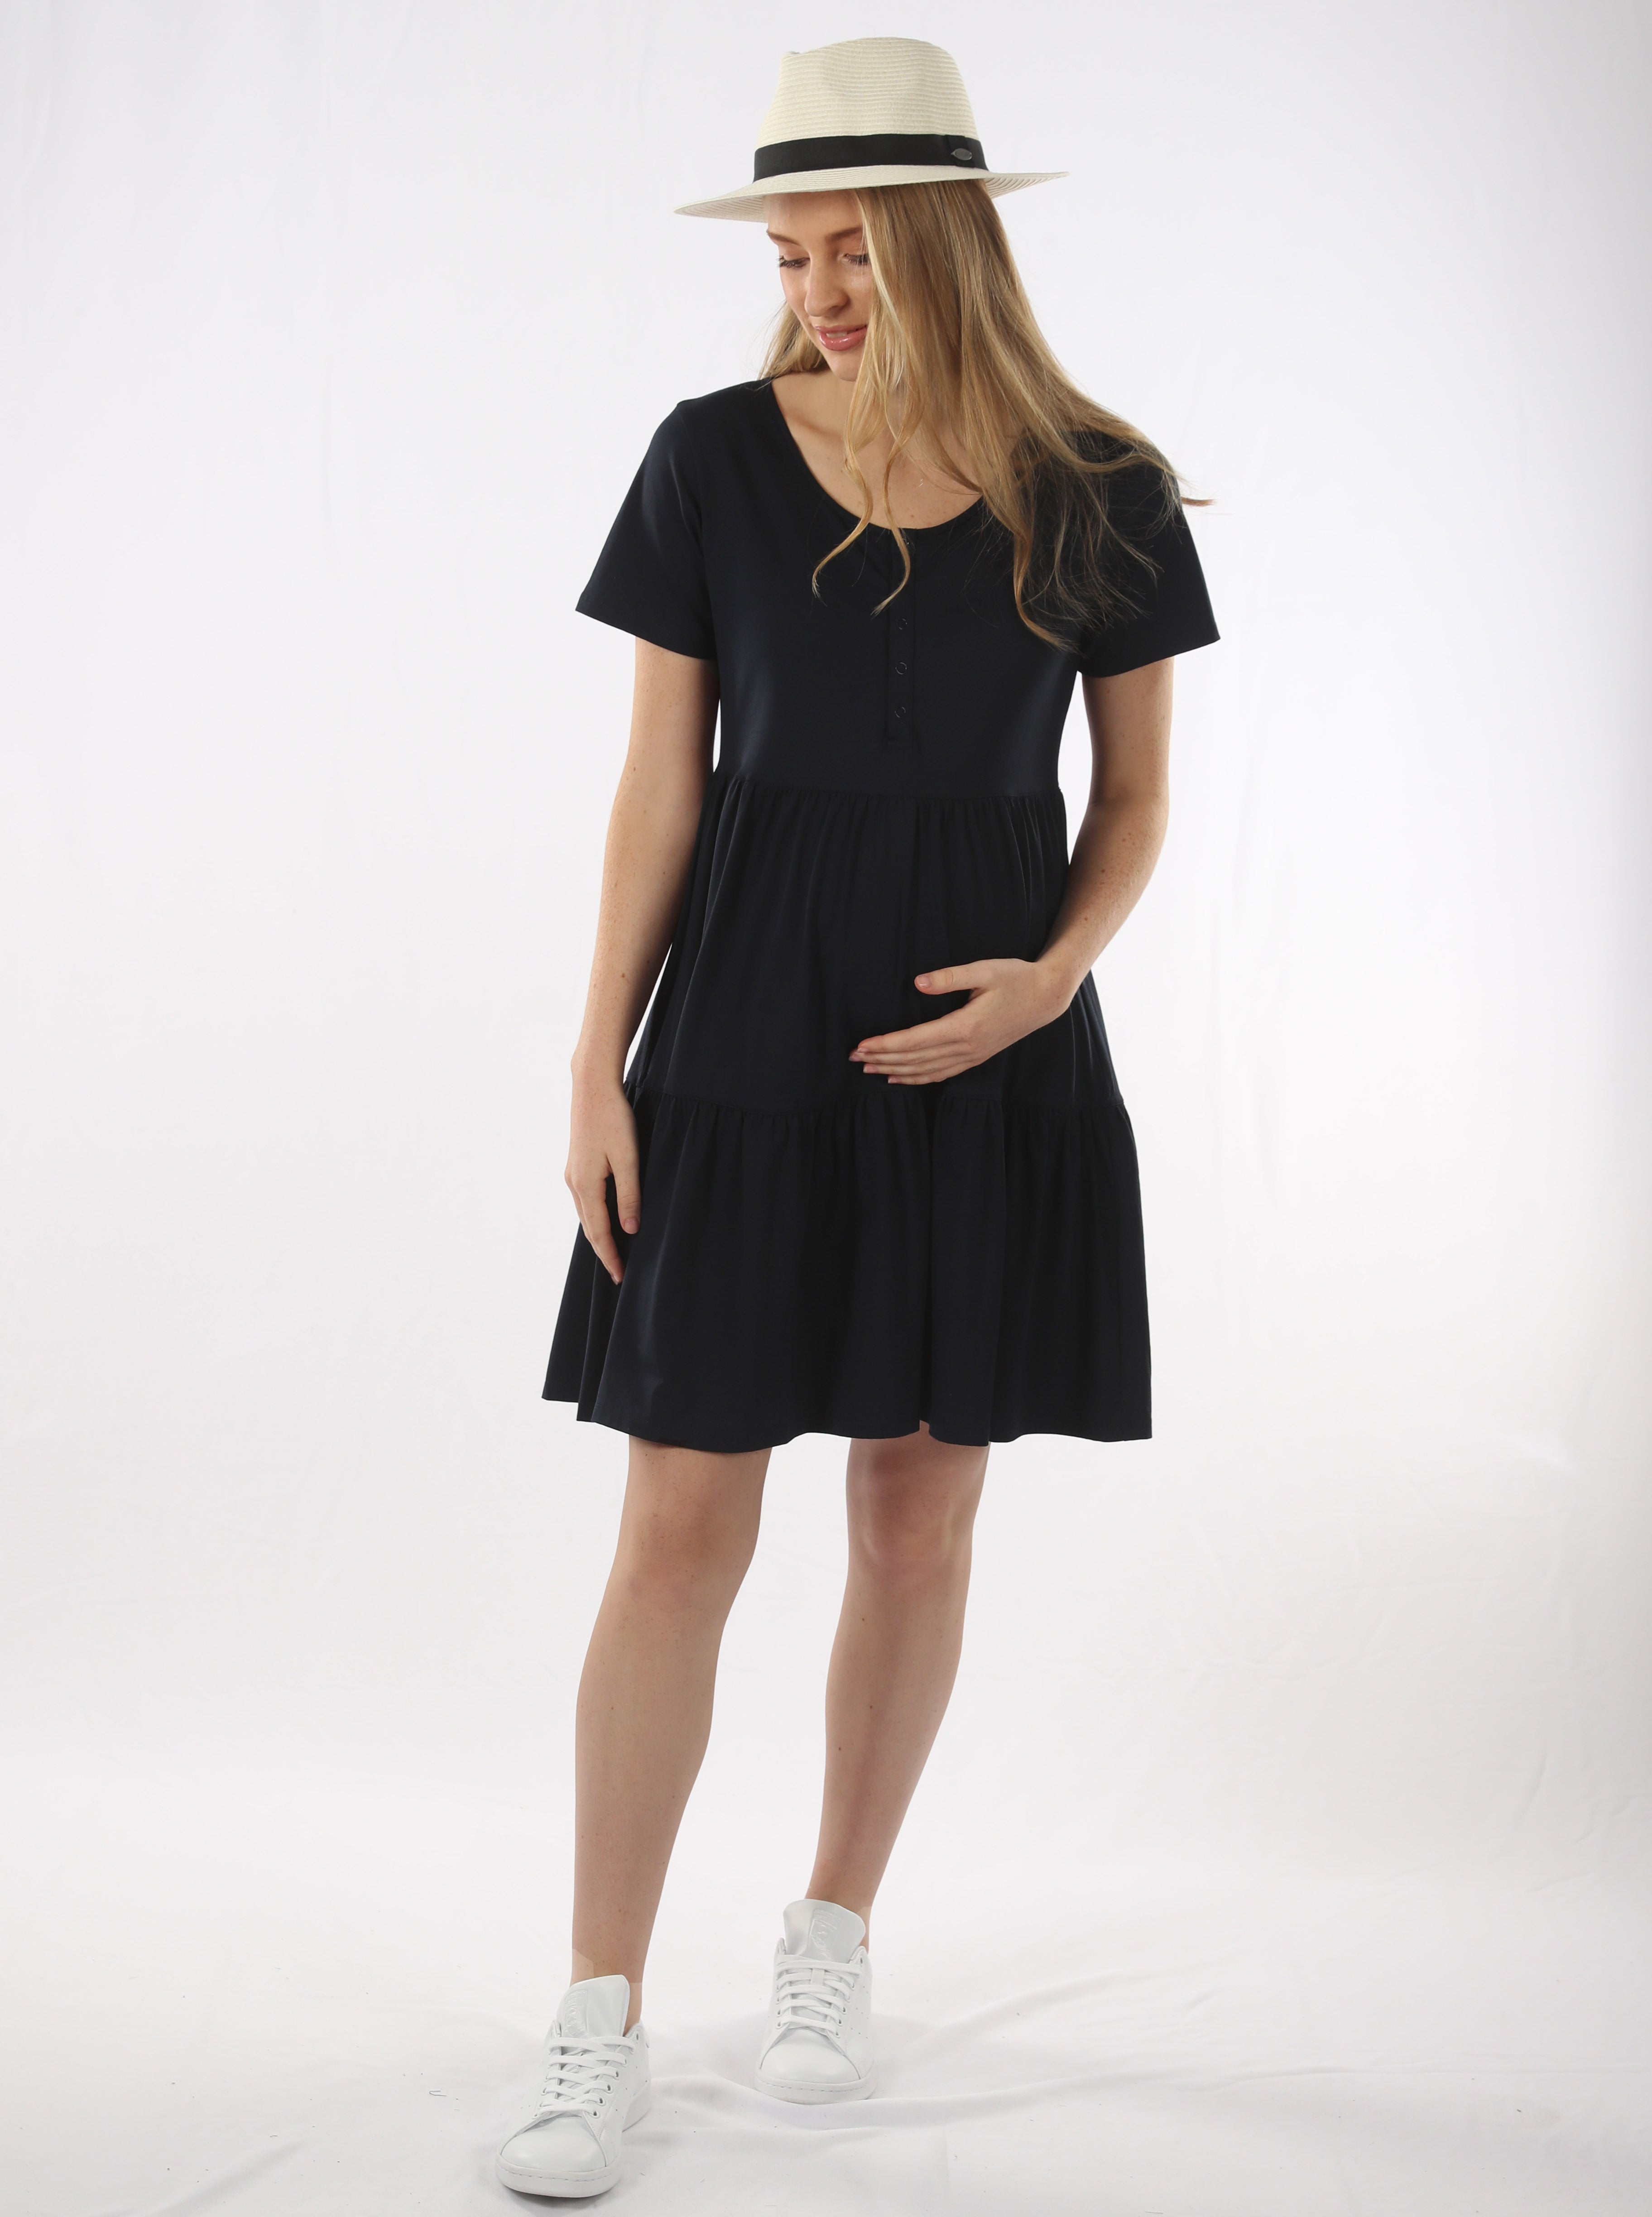 Amazon.com: Maternity Dress Sexy Exposed Belly Backless Photography Dresses  Womens Photoshoot Gowns (as1, Alpha, s, Regular, Regular) Black : Clothing,  Shoes & Jewelry